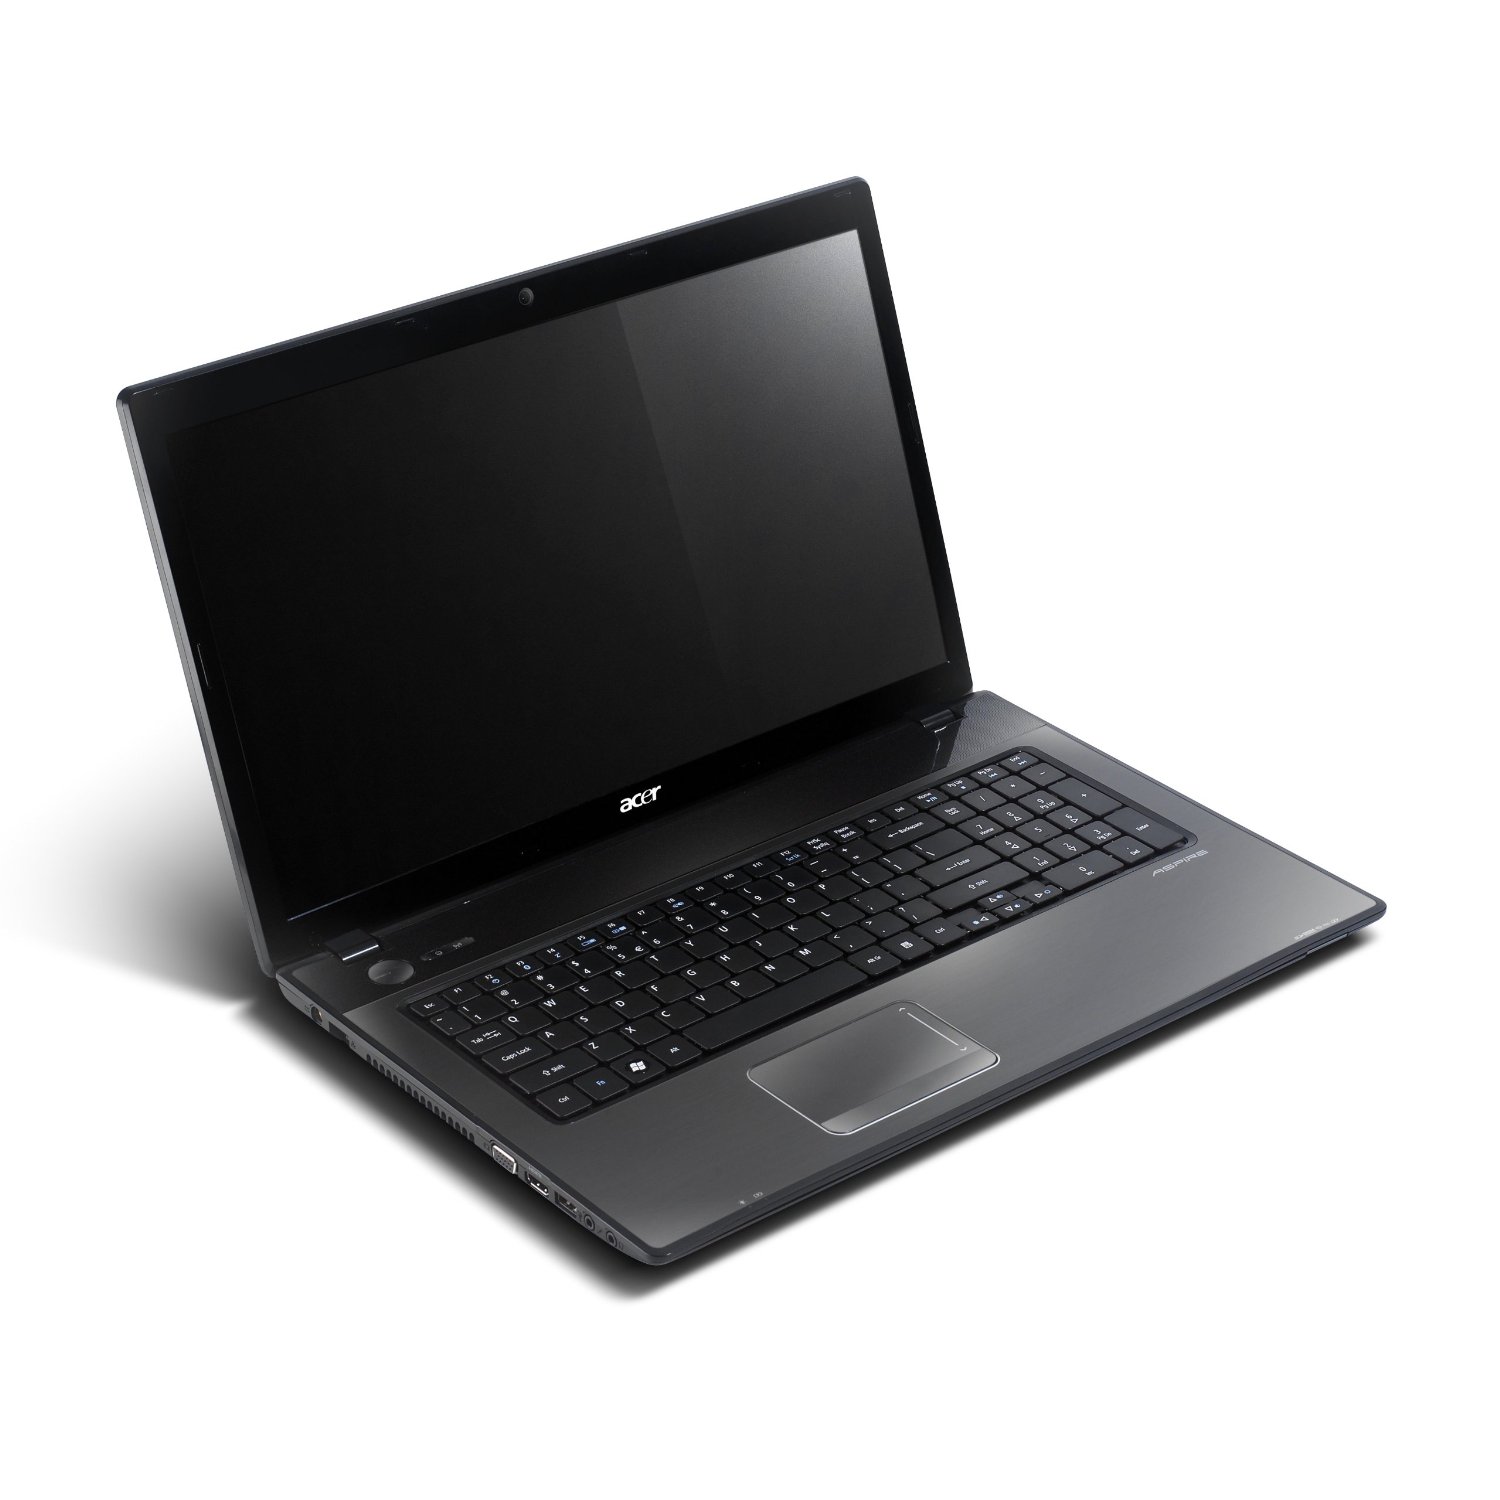 http://thetechjournal.com/wp-content/uploads/images/1111/1320601757-acer-as7741g6426-173inch-laptop--8.jpg